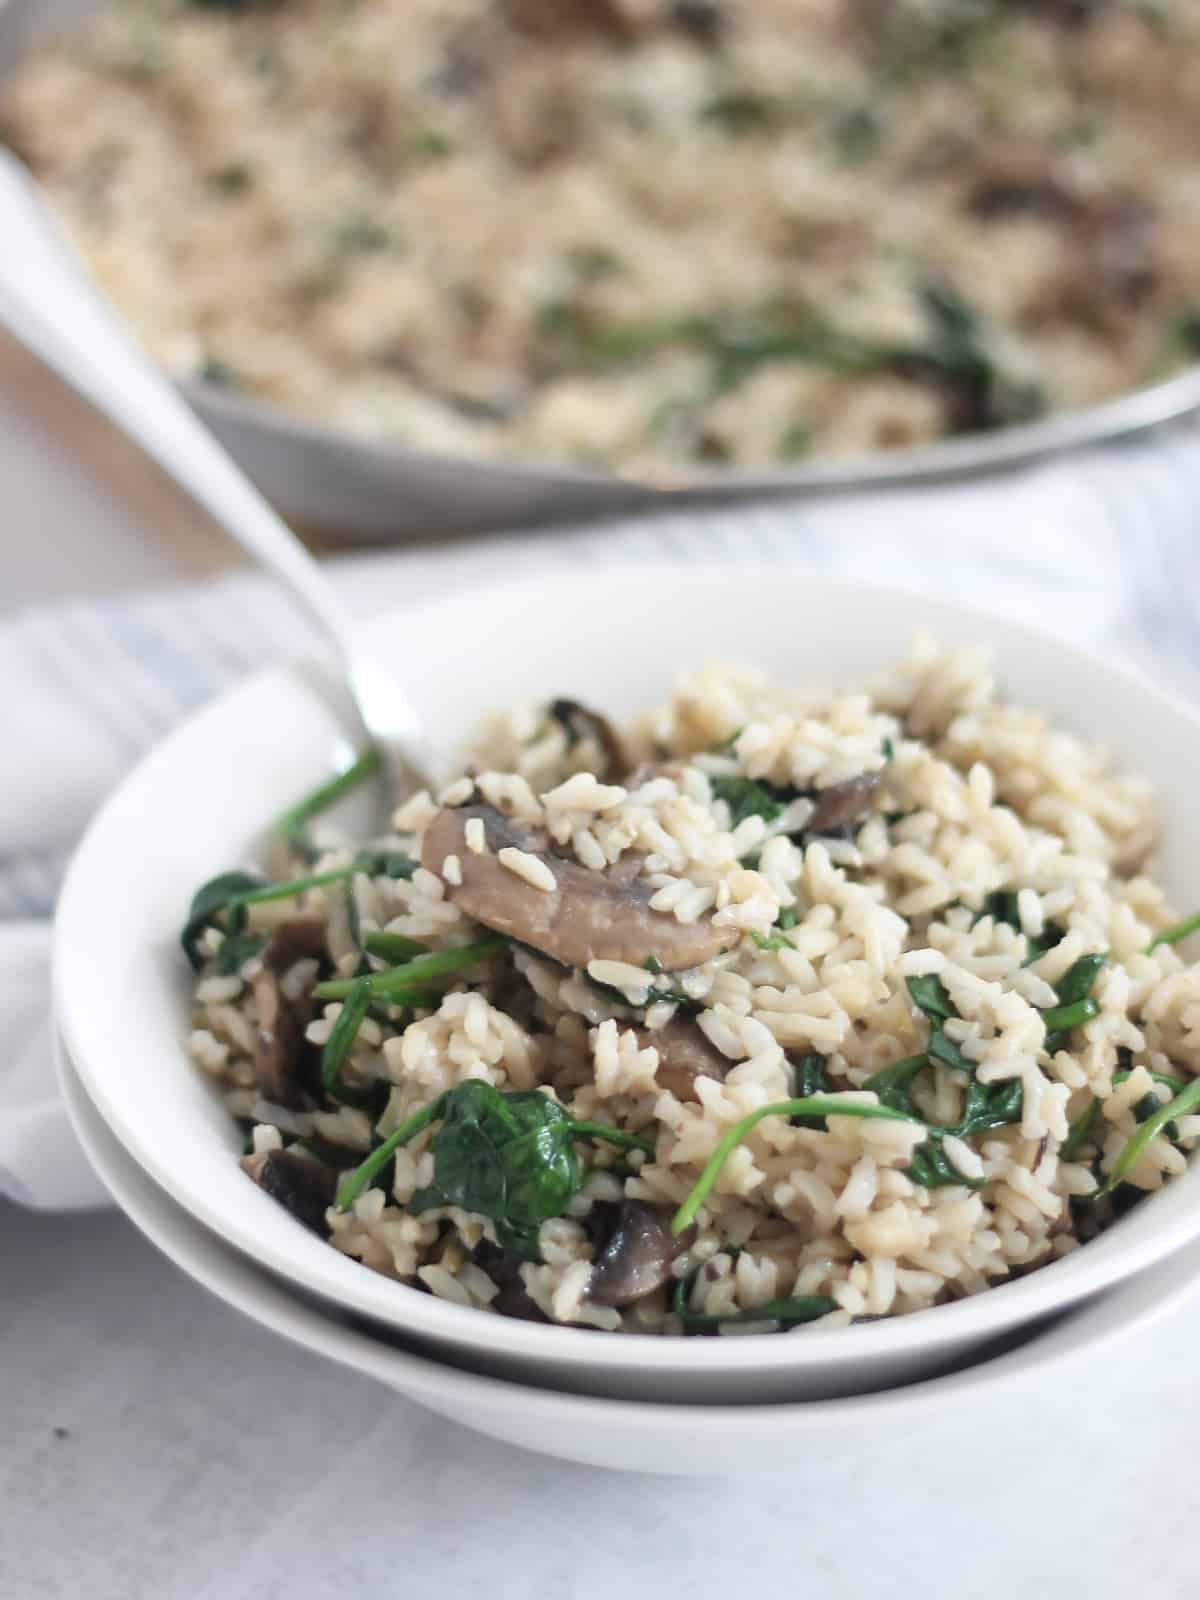 Spinach mushroom rice in a white bowl with a spoon.